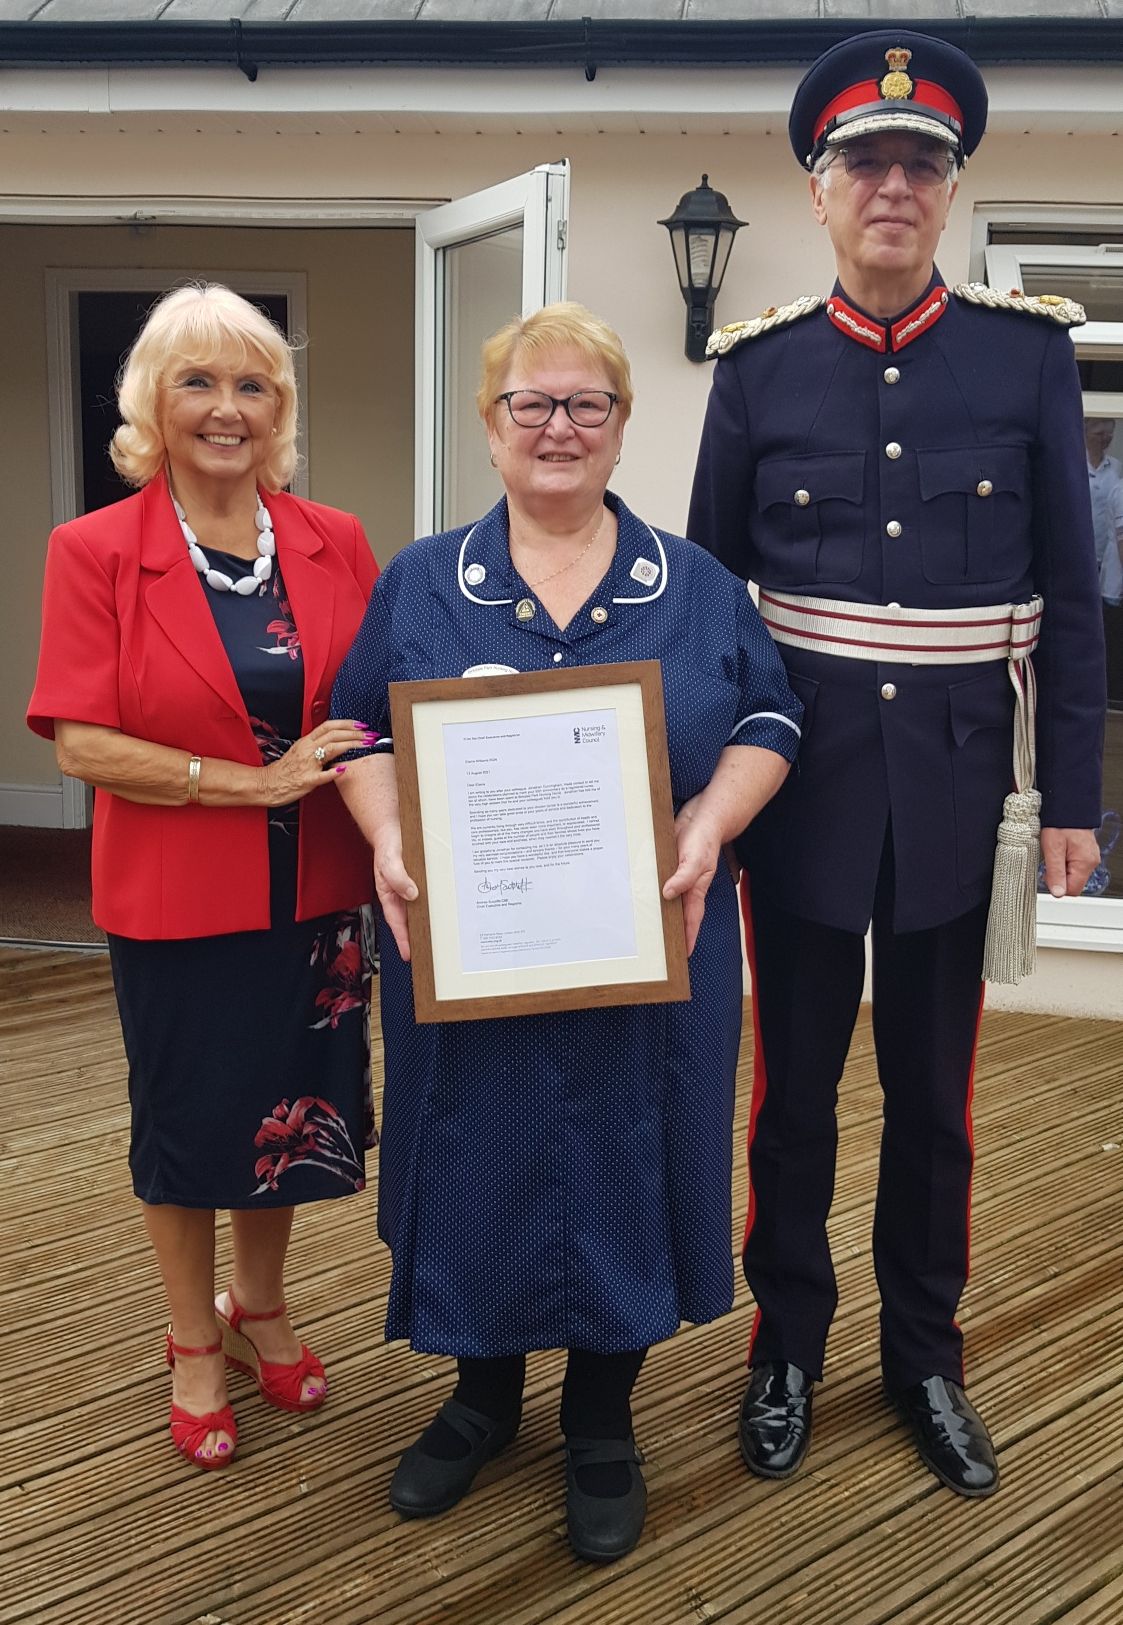 Elaine Williams RGN with Mark Blundell the Merseyside Lord Lieutenant with owner Carol Cunningham at Birkdale Park Nursing Home in Southport